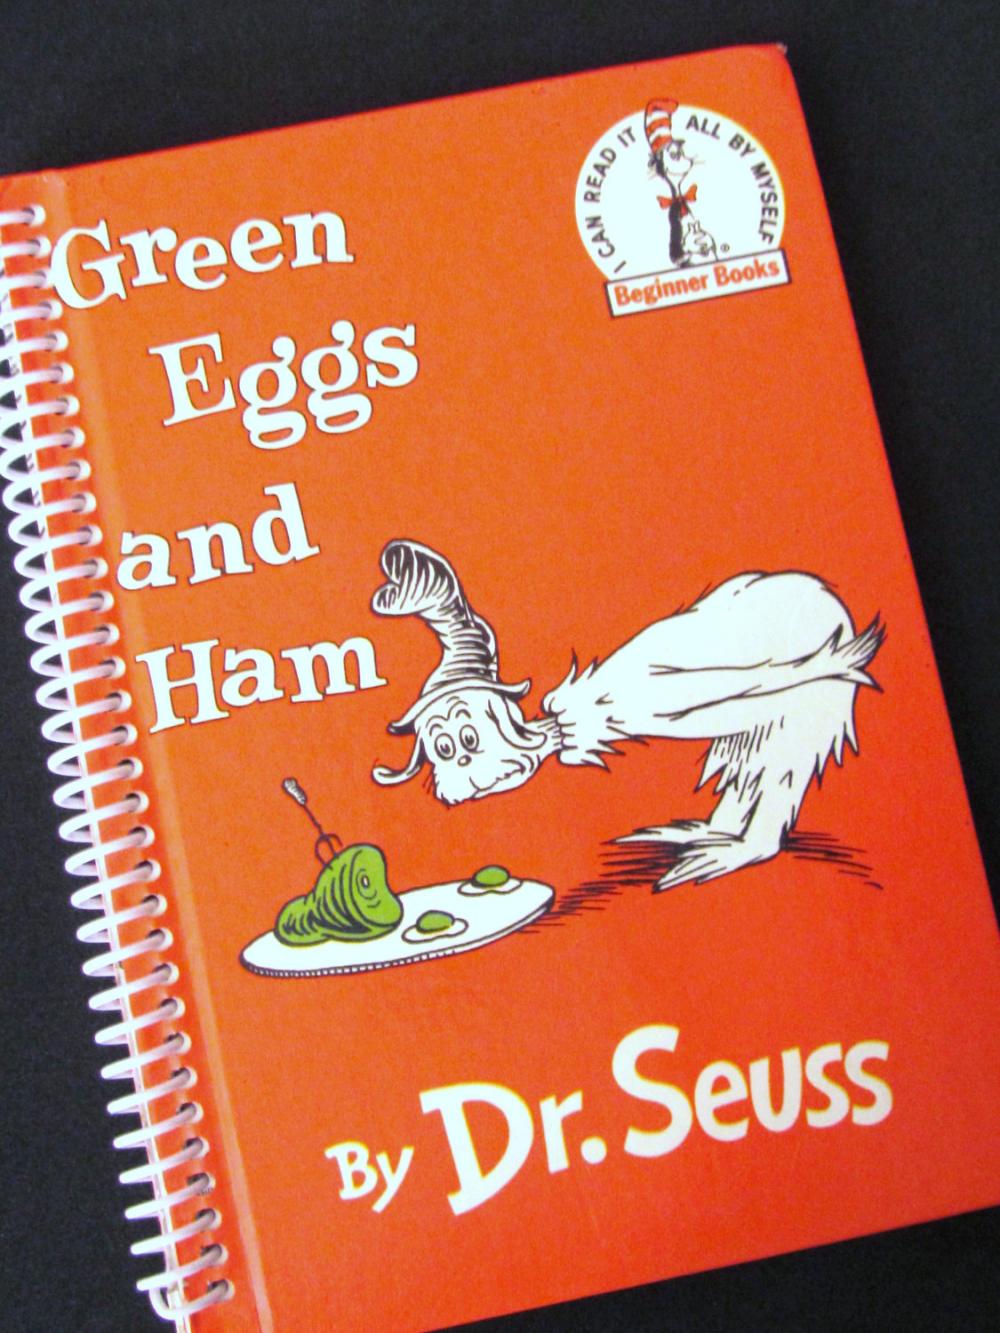 Dr. Seuss Upcycled Green Eggs And Ham Journal Book - Recycled And Earth Friendly - Beginning Reader Book